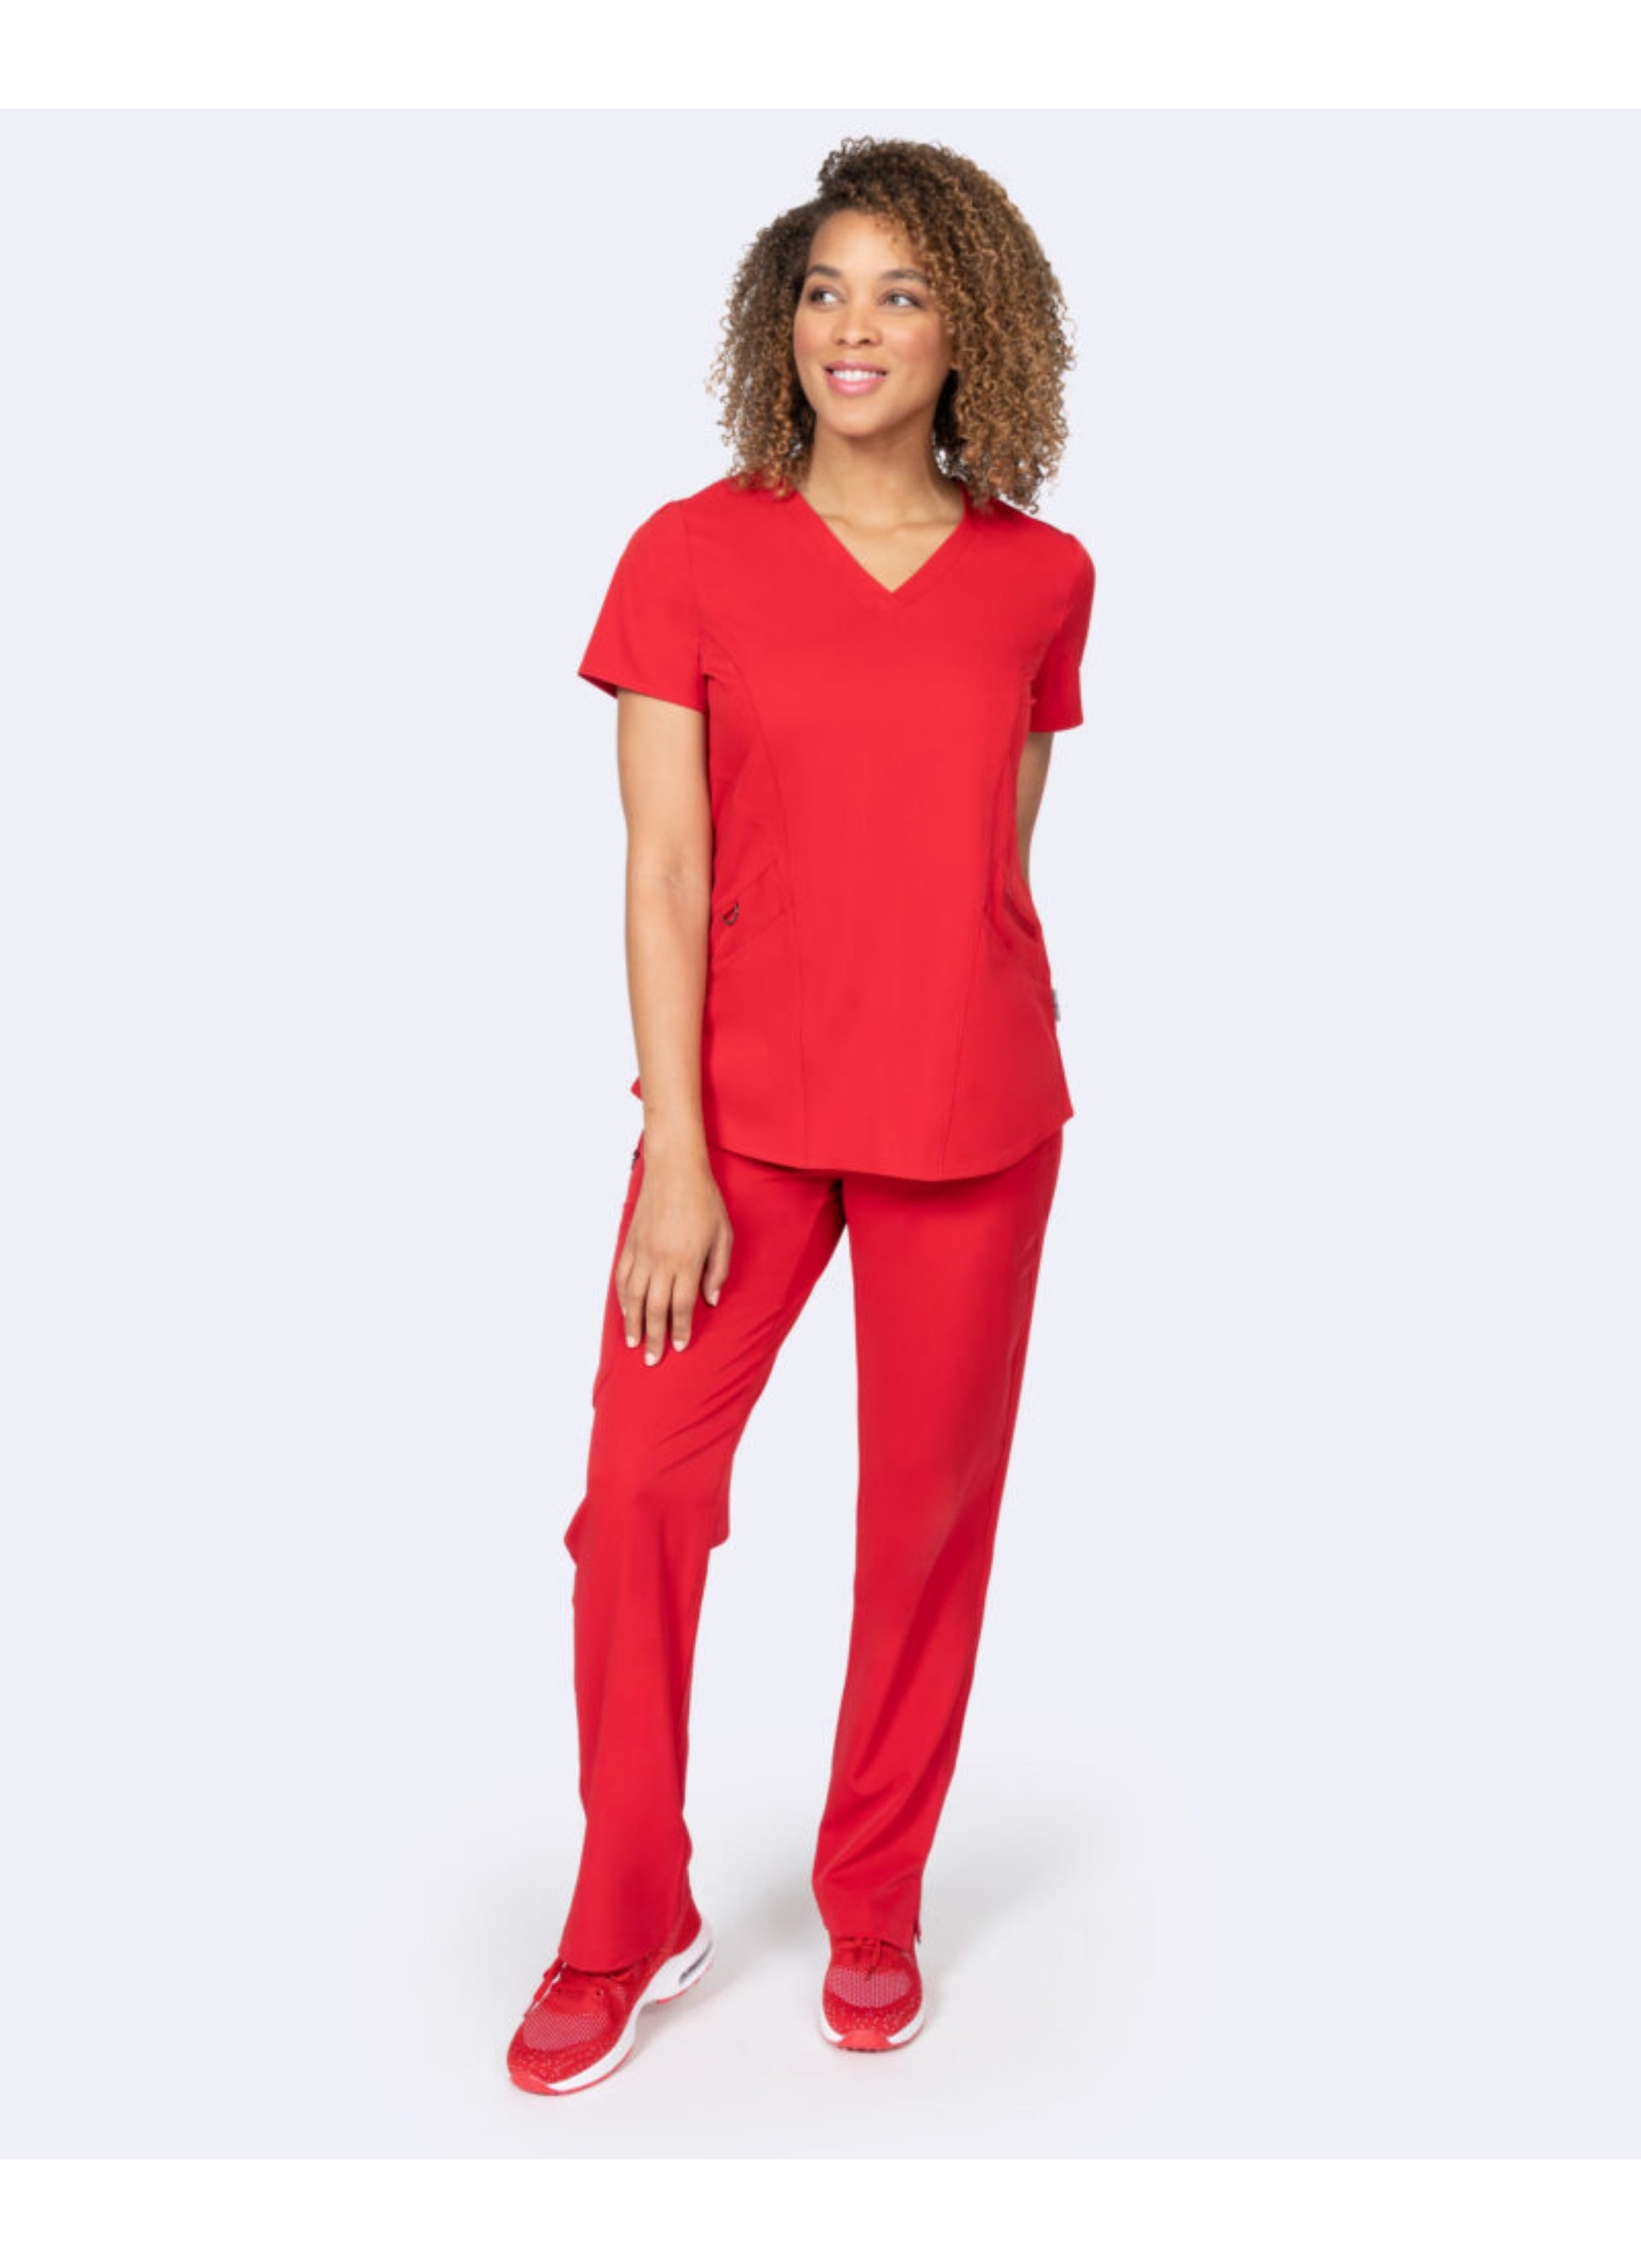 My Favorite Scrubs Ava Back Knit Top St.Charles Mo 